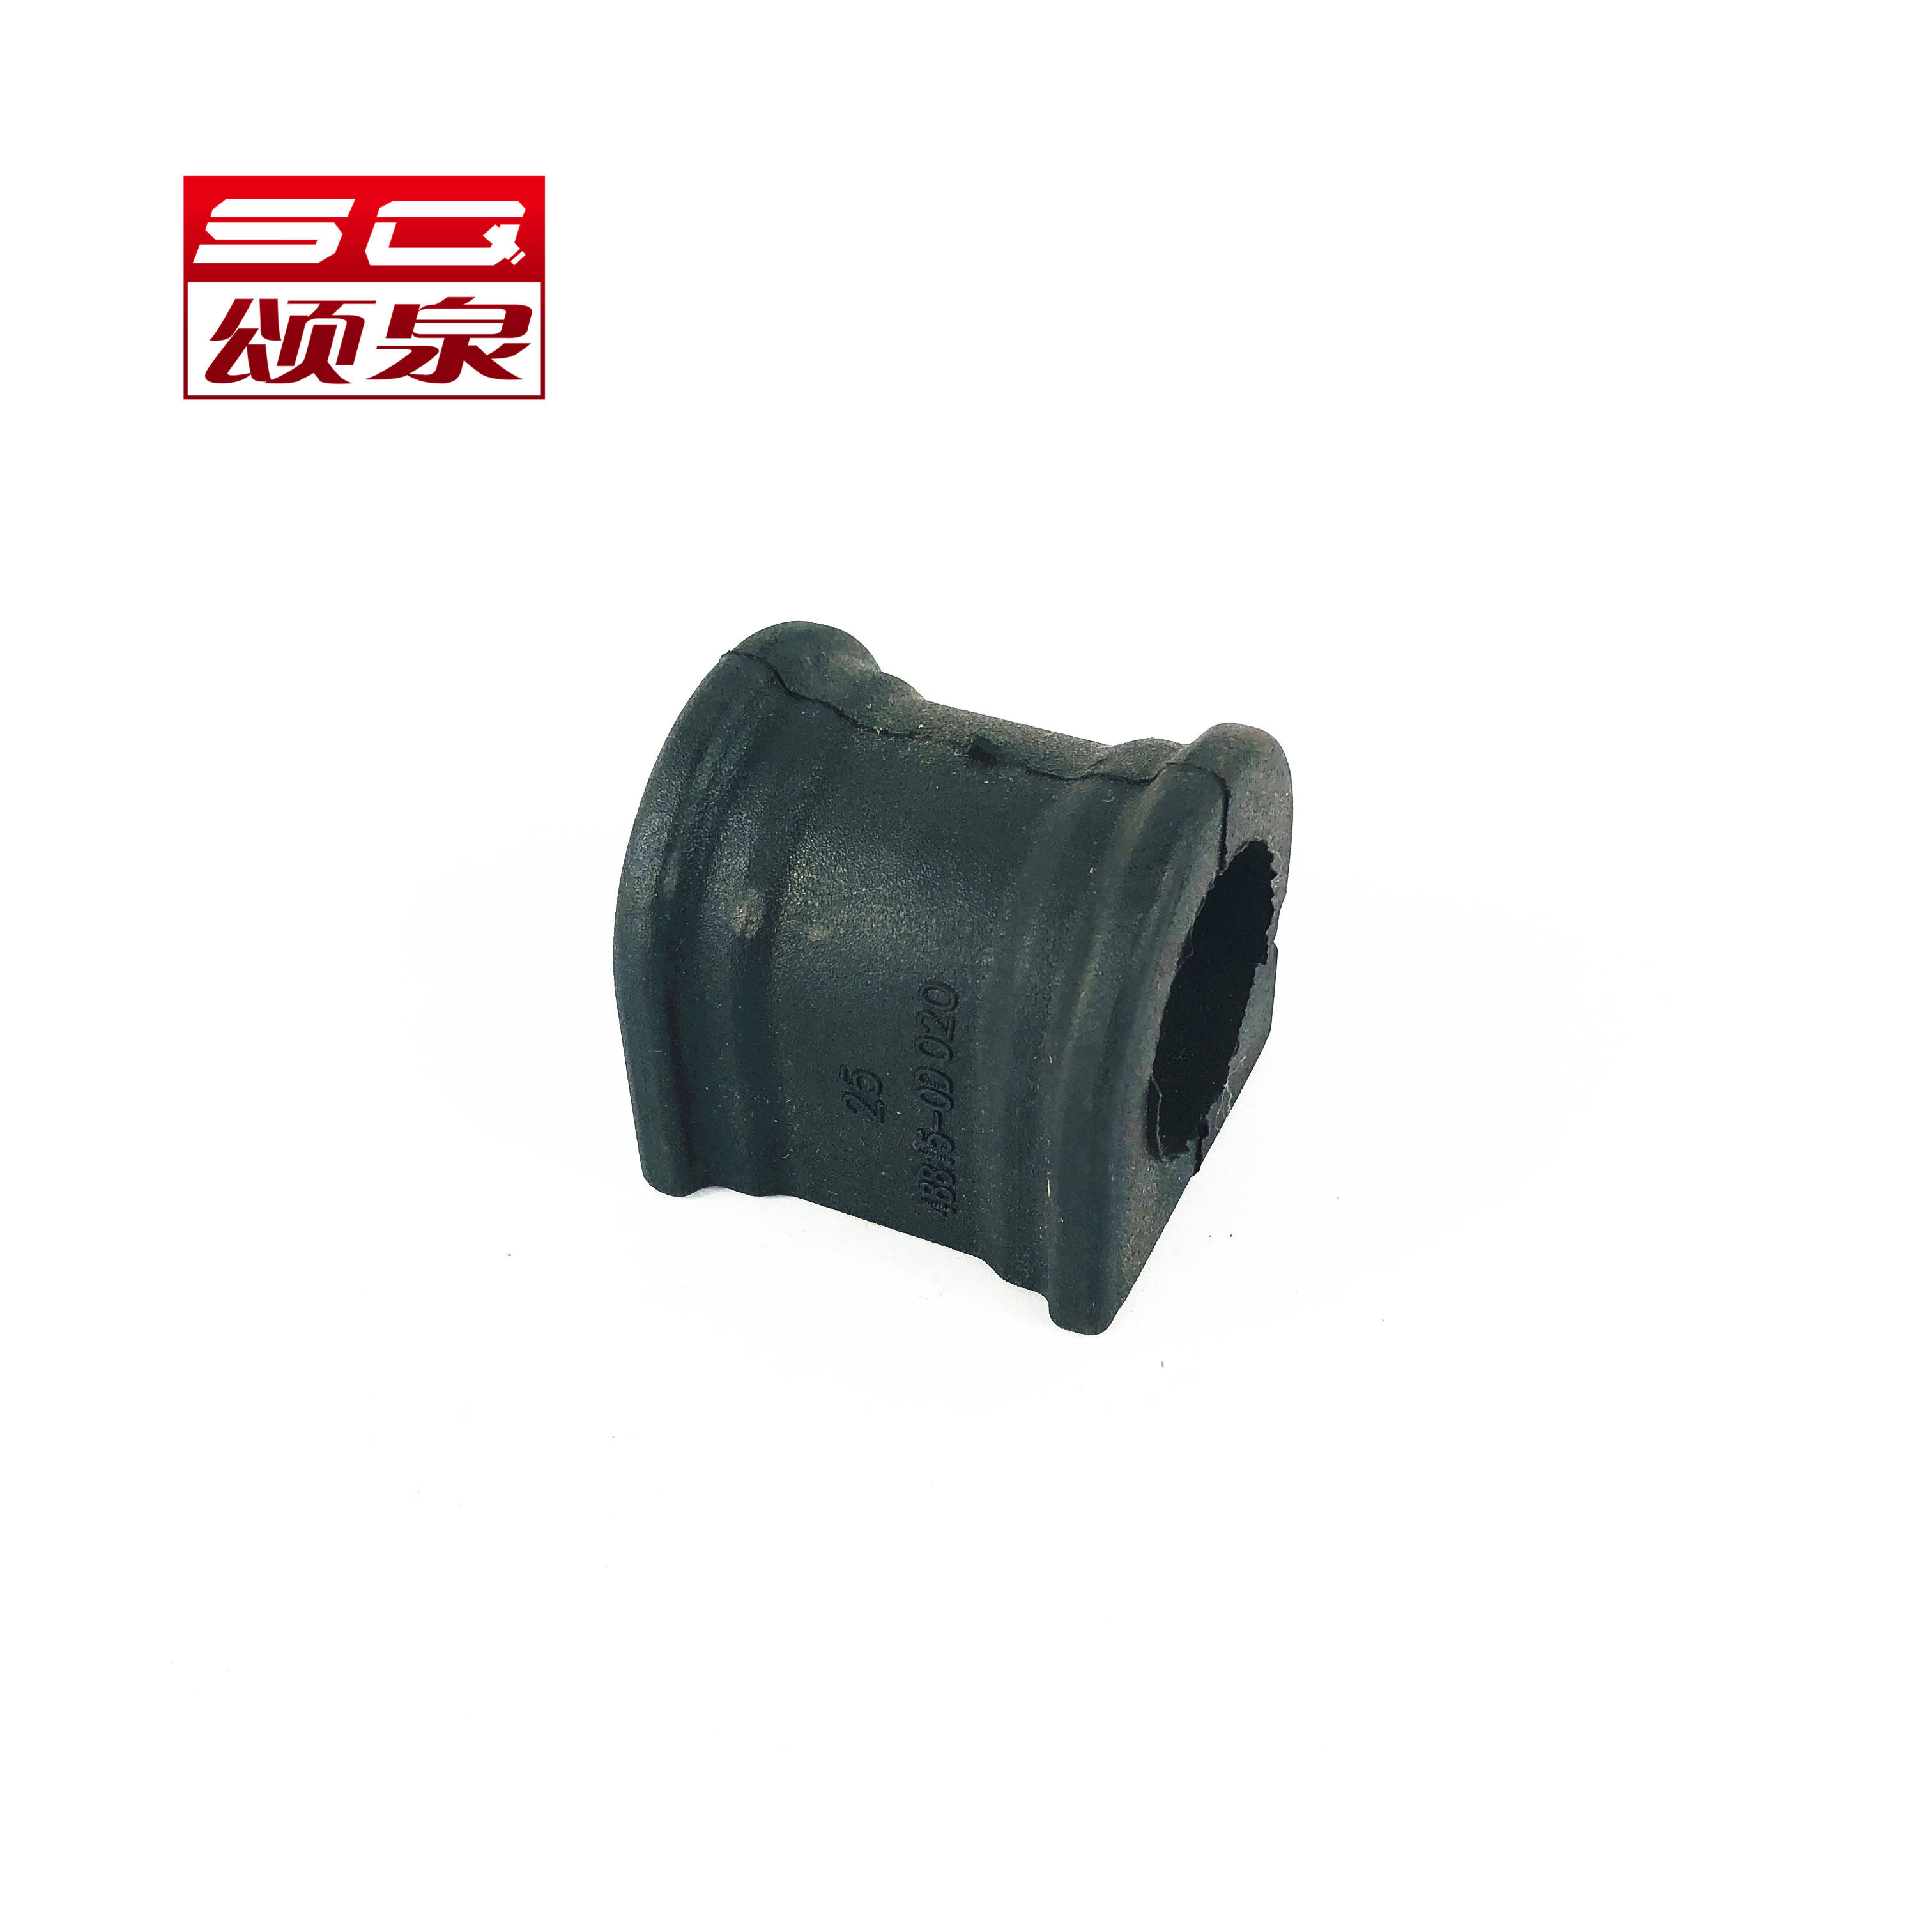 48815-0D020 48815-0D040 48815-52030 Stabilizer Bushing for TOYOTA High Quality Rubber Bushing